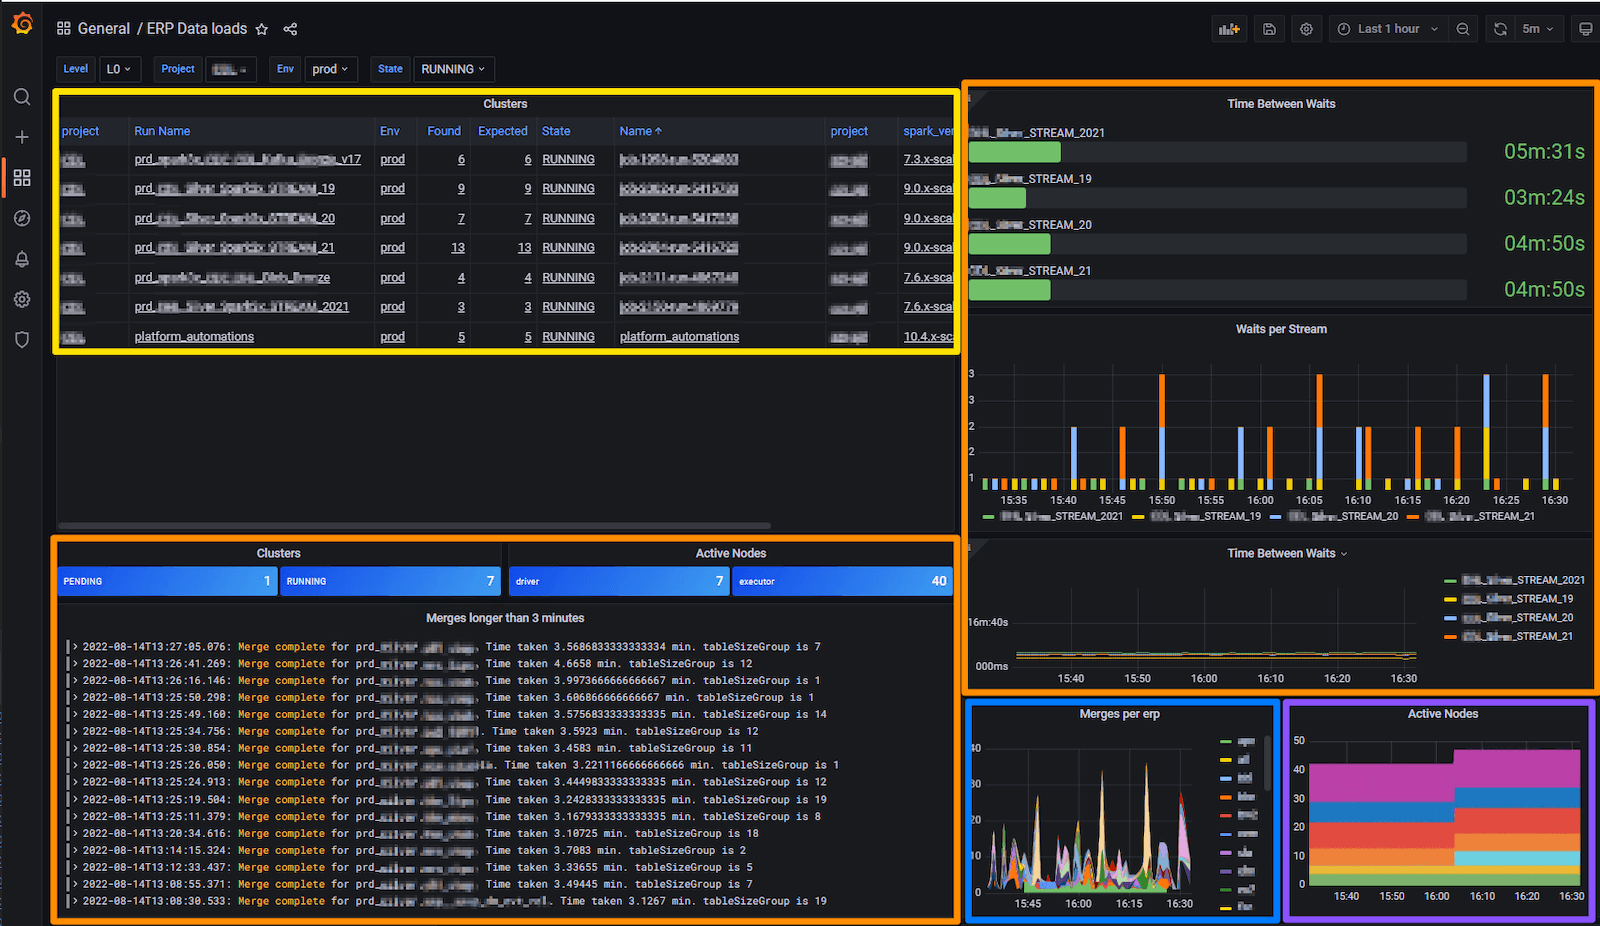 *A Grafana dashboard showing cluster and job status, job performance, ERP distribution and active nodes*